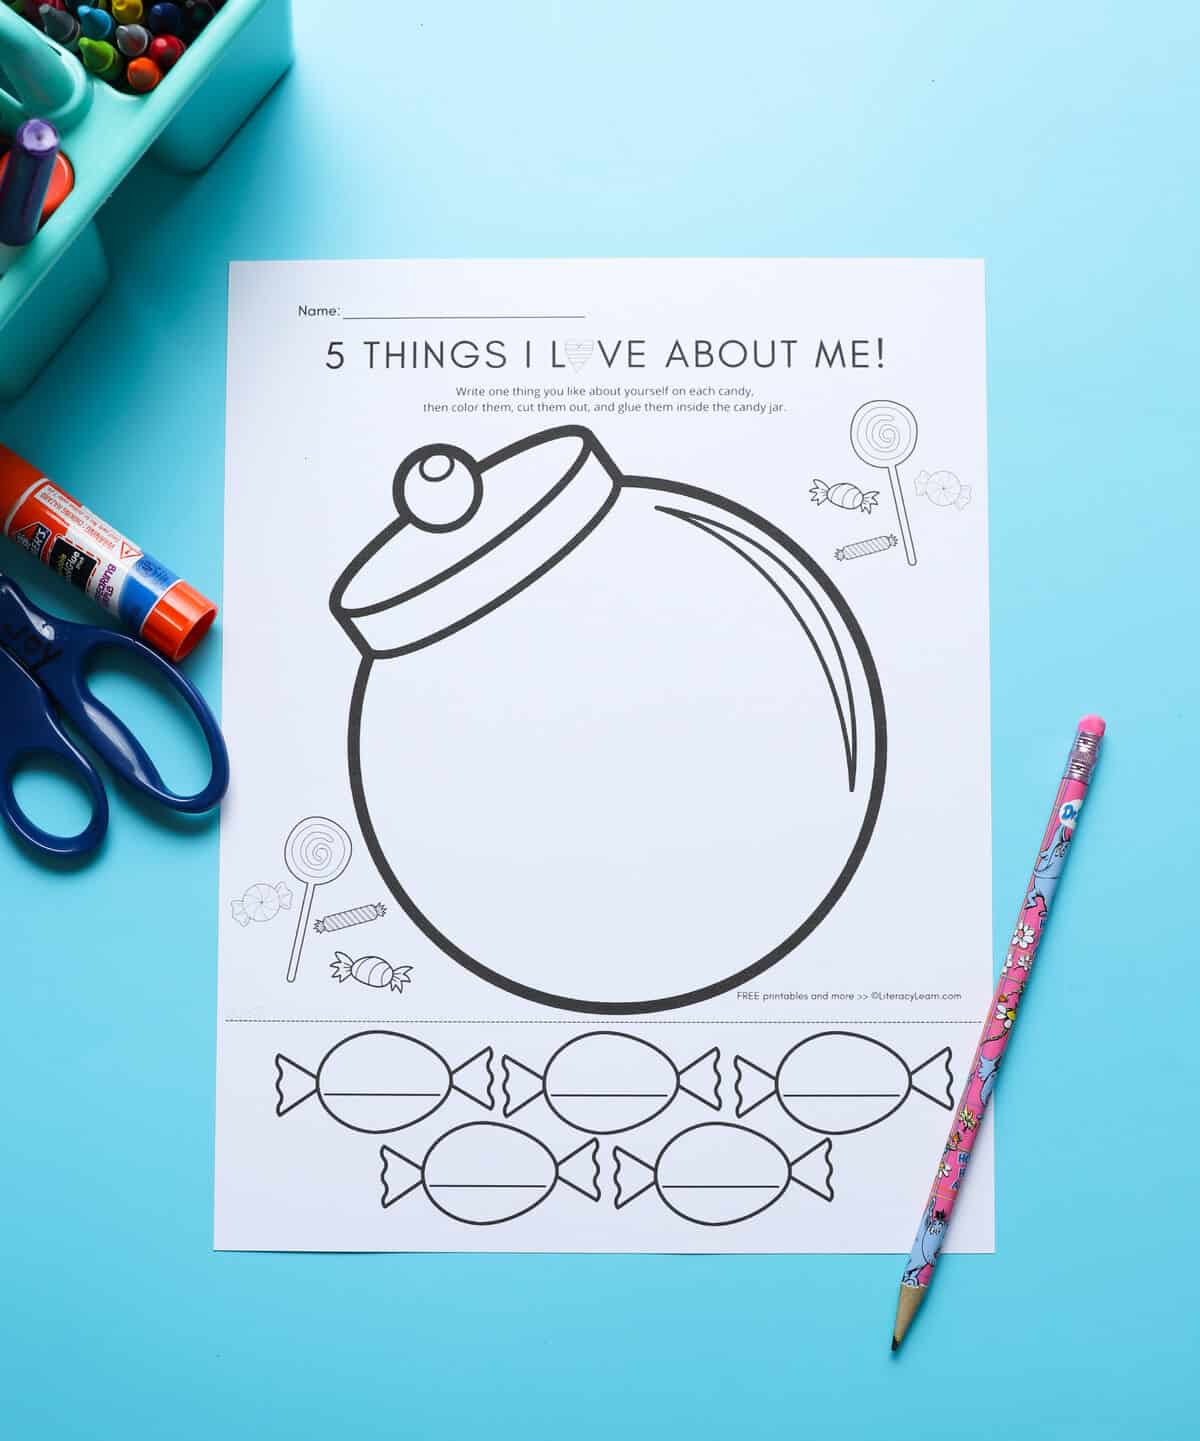 The printed I love me candy jar worksheet with crayons and a scissor.